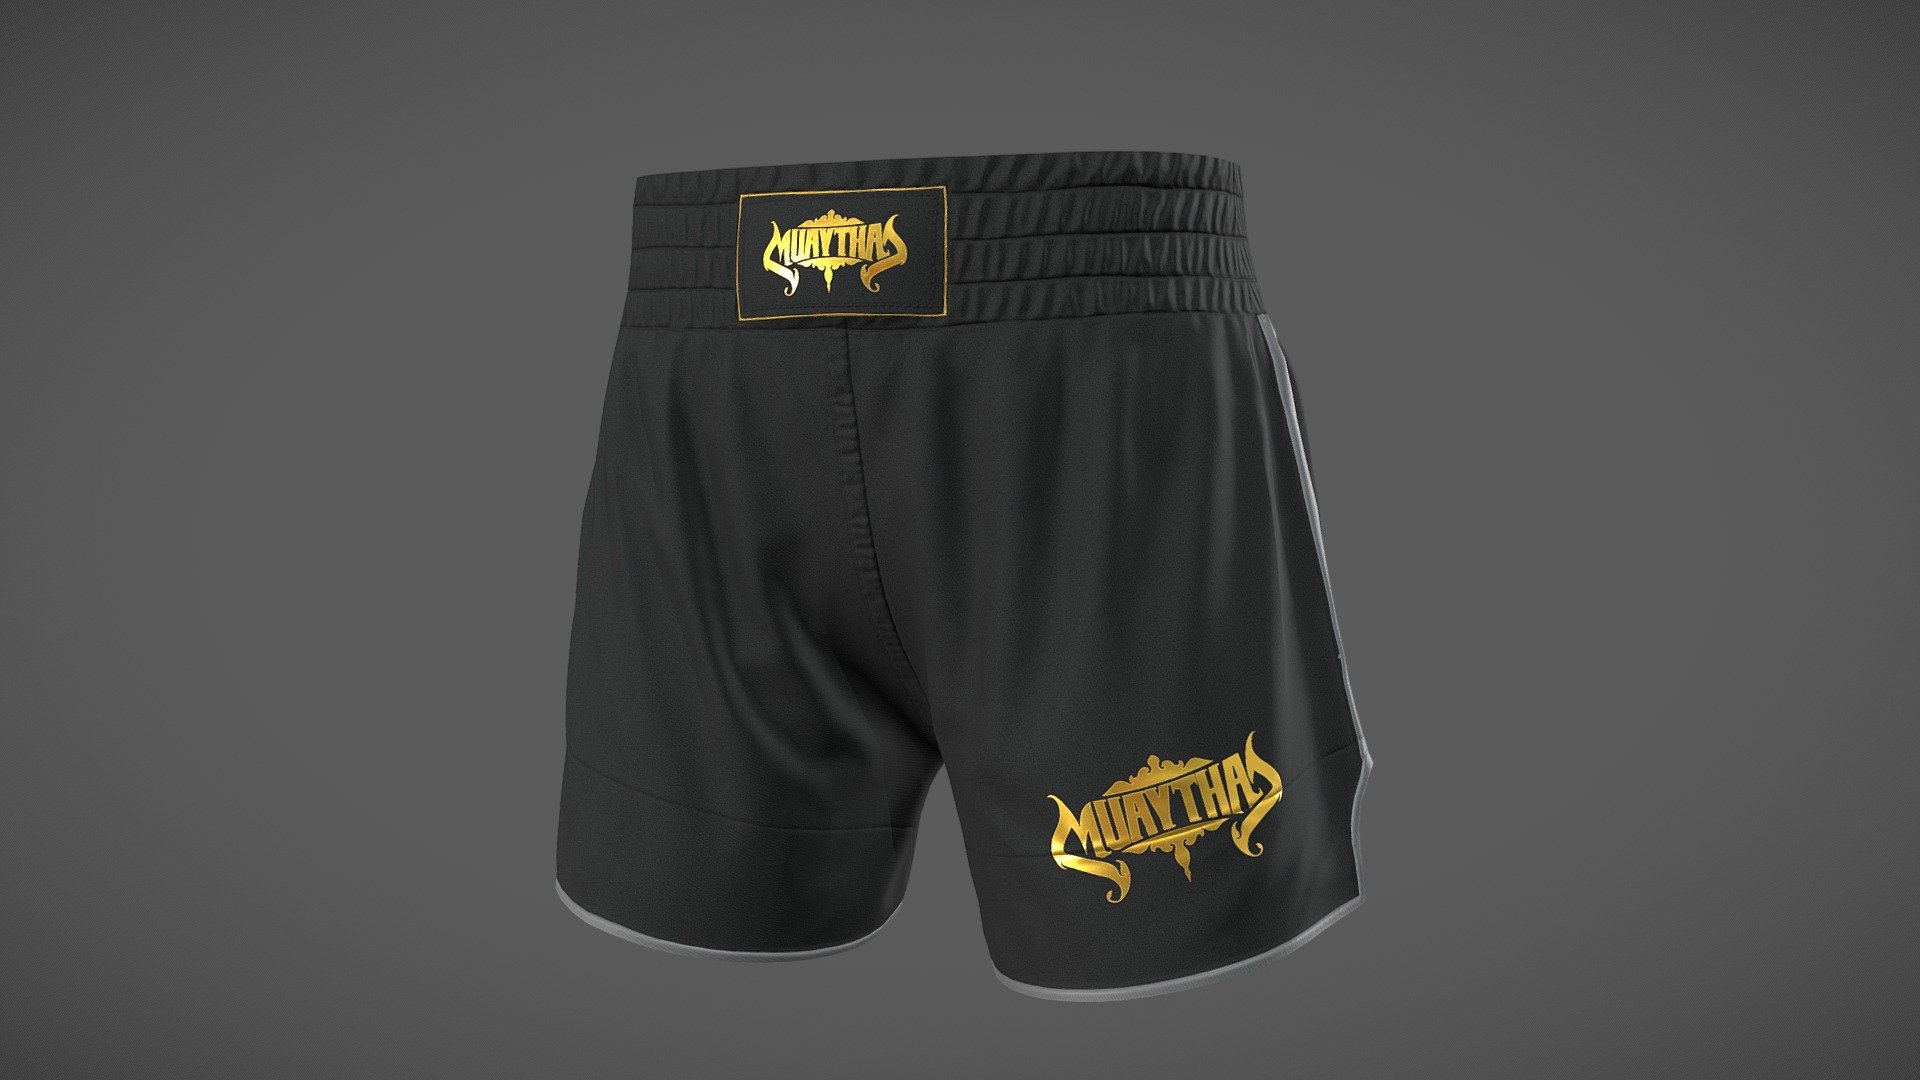 MMA Shorts - boxing shorts

This is a Lowpoly PBR model ready for use in AR, VR, Realtime Visualizations, Games with 4K Textures.

Features: Low-poly game ready PBR Model, Real-World Scale, High-quality 4K Textures 3d model